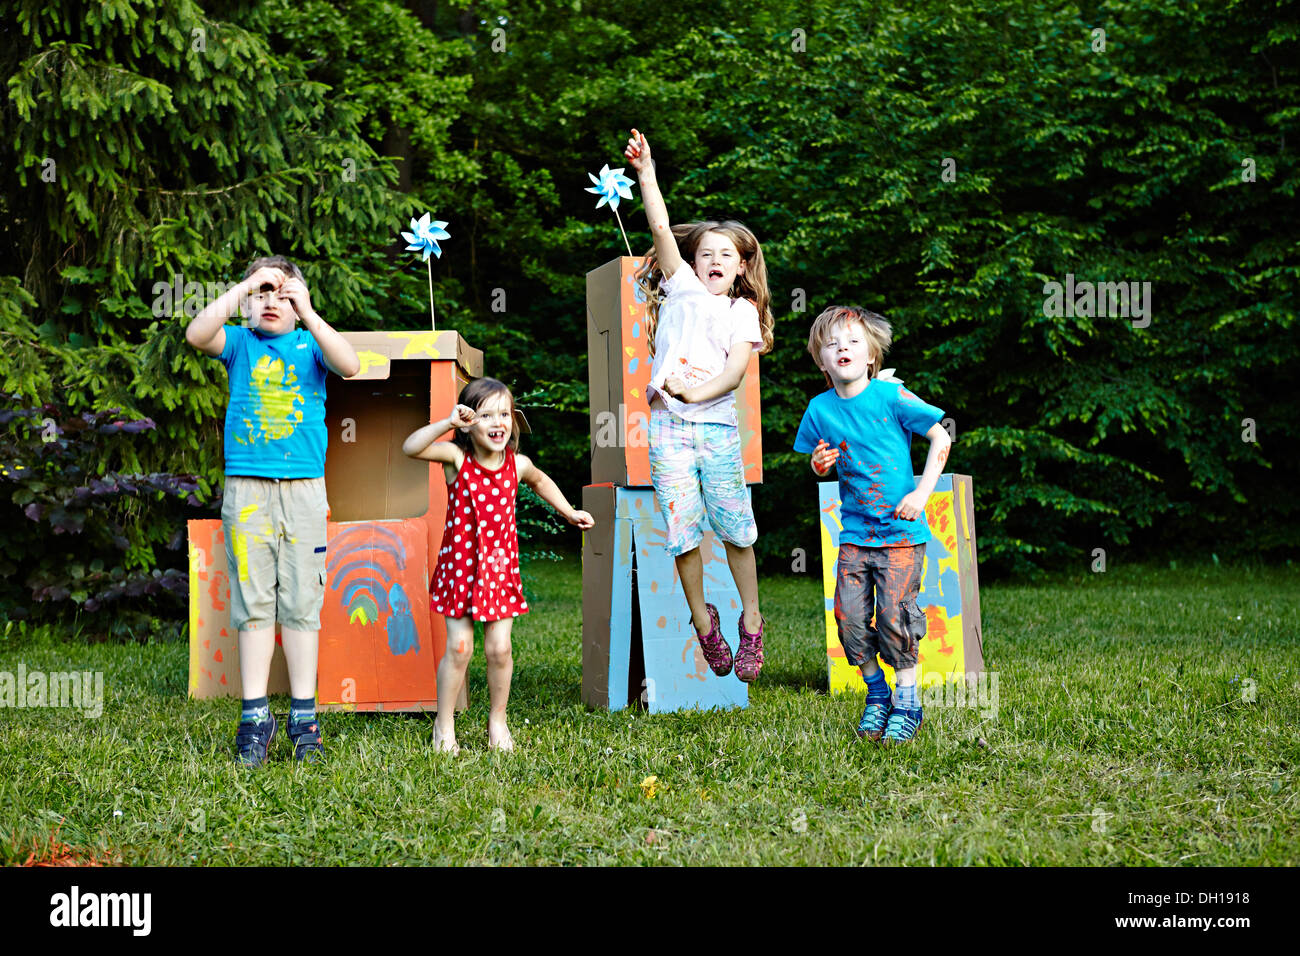 Children playing in cardboard boxes, Munich, Bavaria, Germany Stock Photo